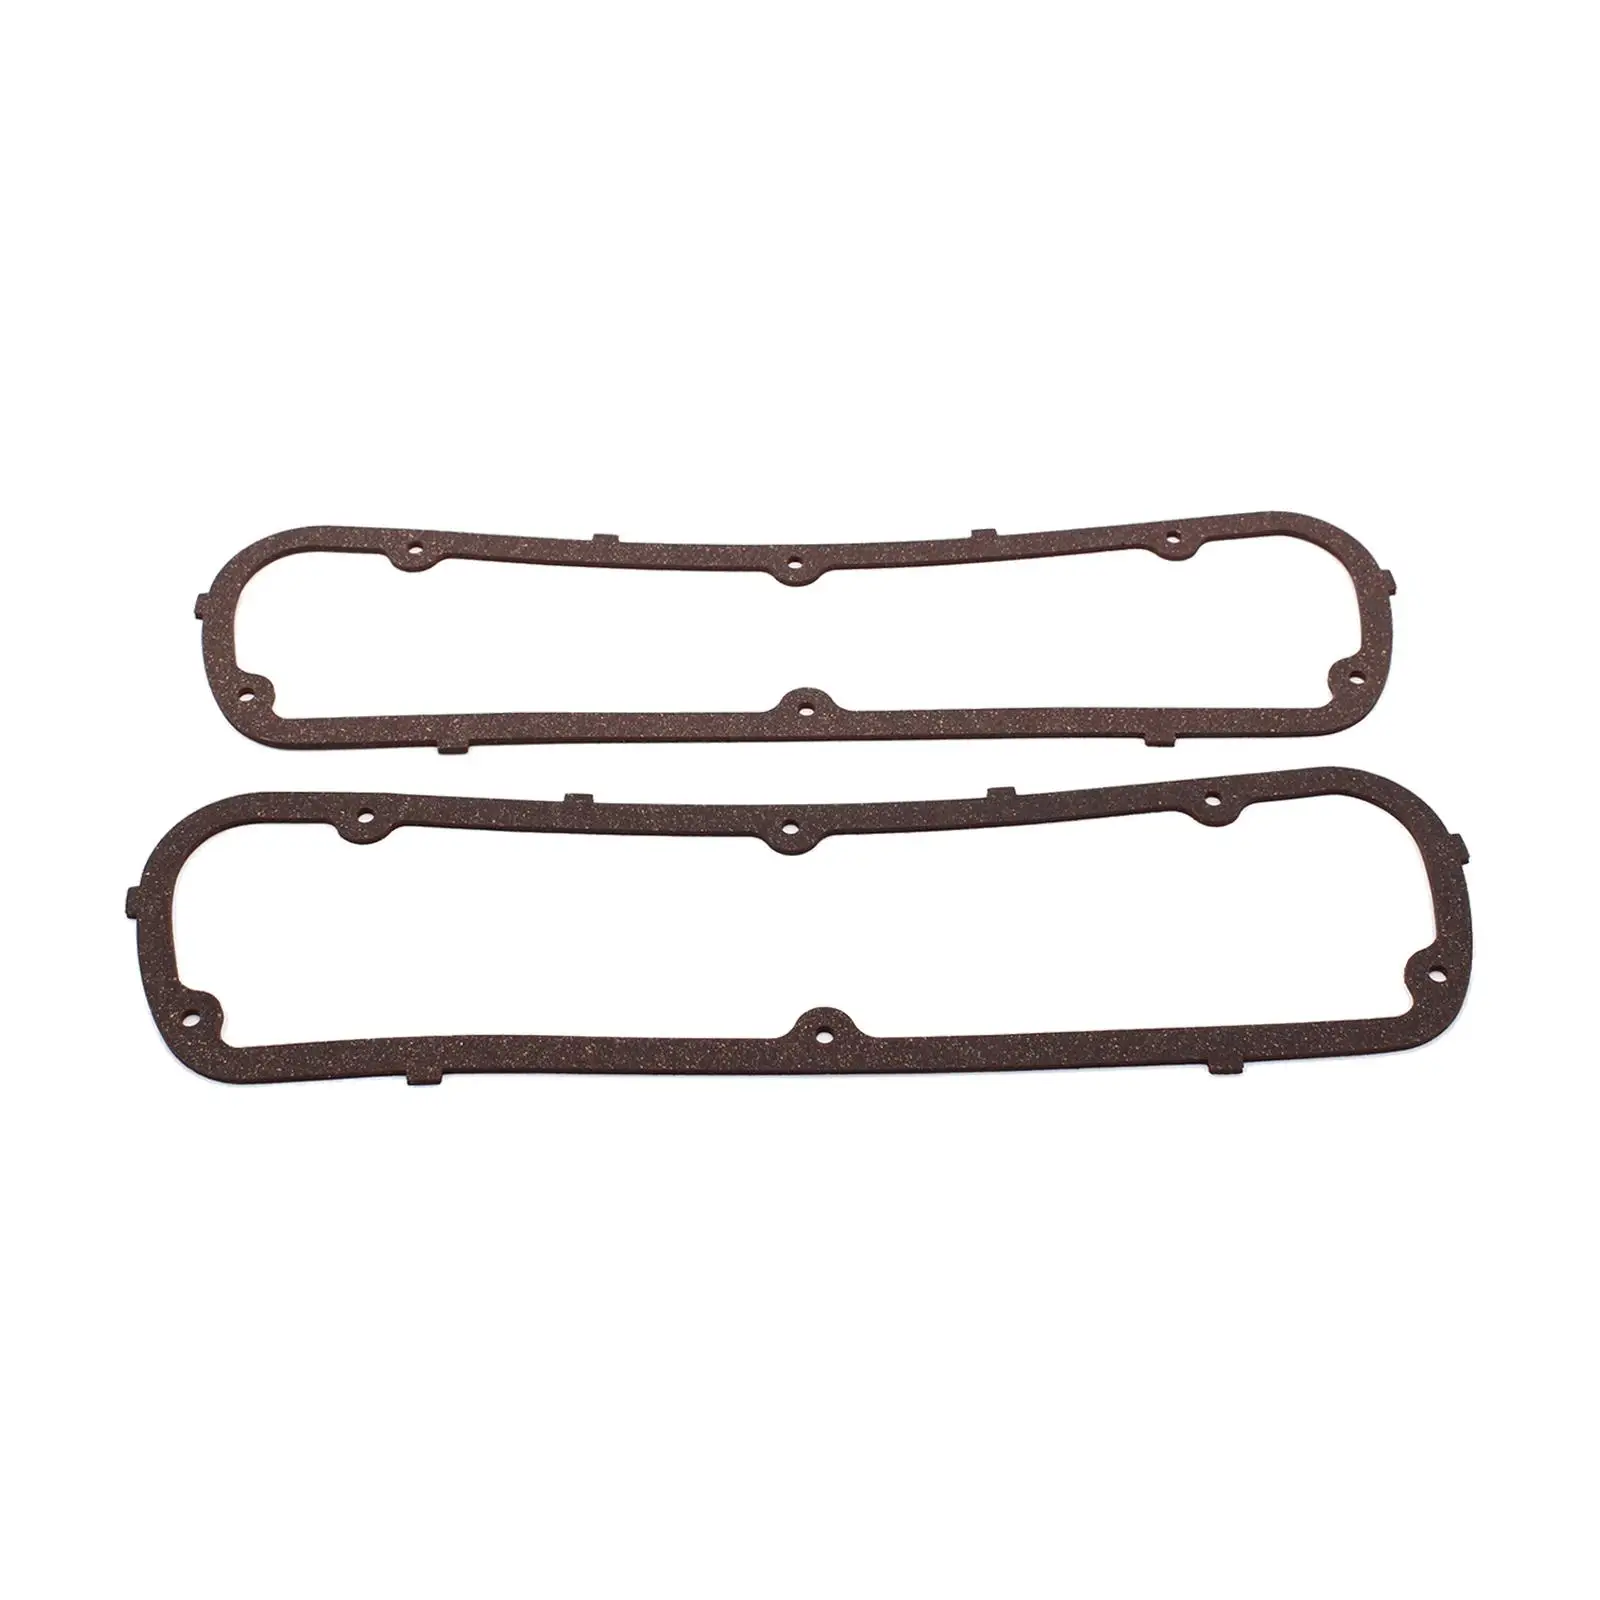 

2x Cork Valve Cover Gasket 1/8" Fit for Ford SB Engines 260 289 302 Parts